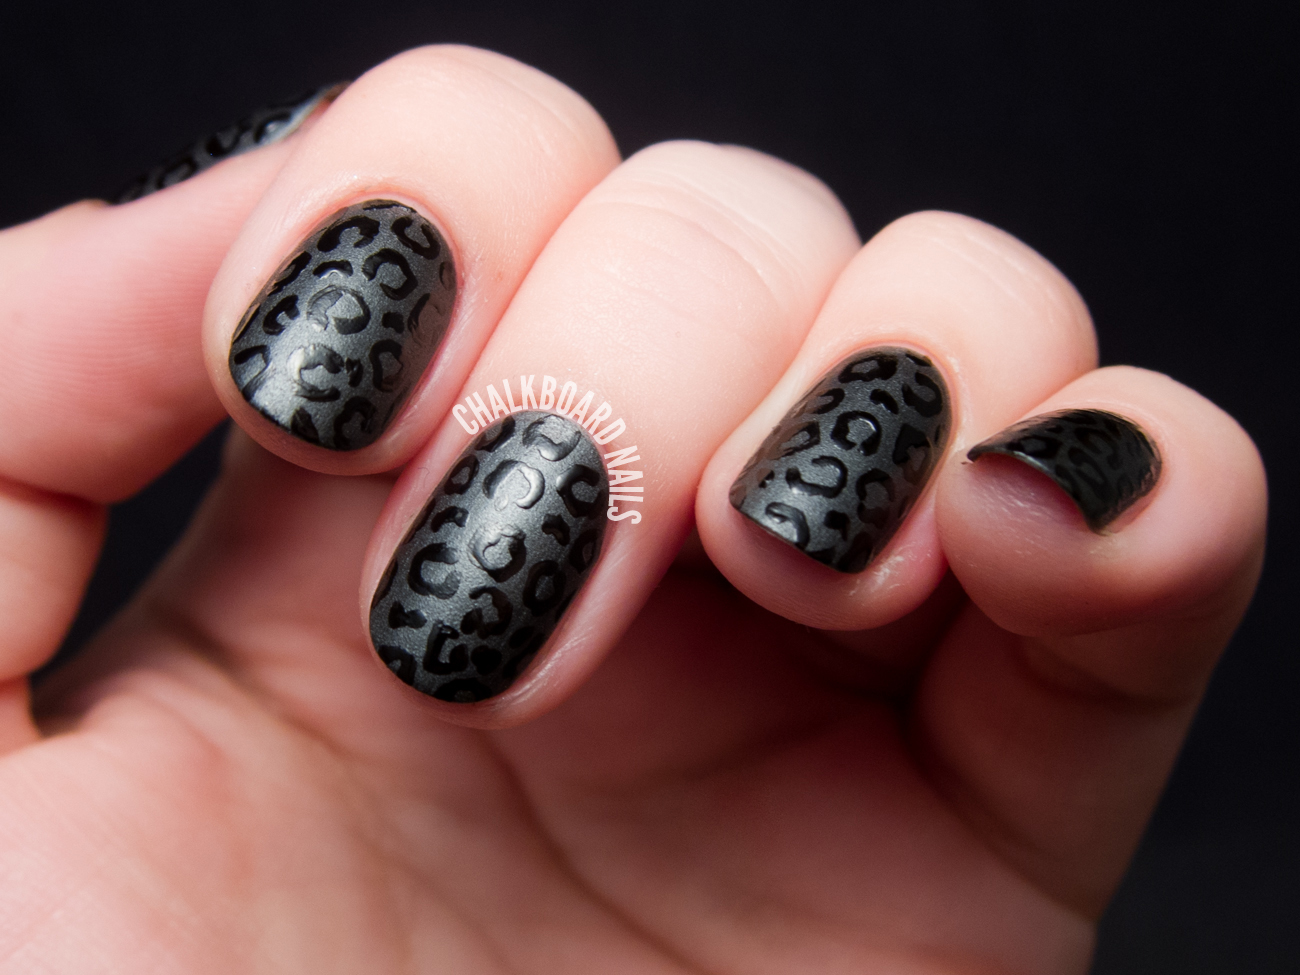 10. "Edgy Animal Print Nail Art Designs for a Wild and Bold Look" - wide 6